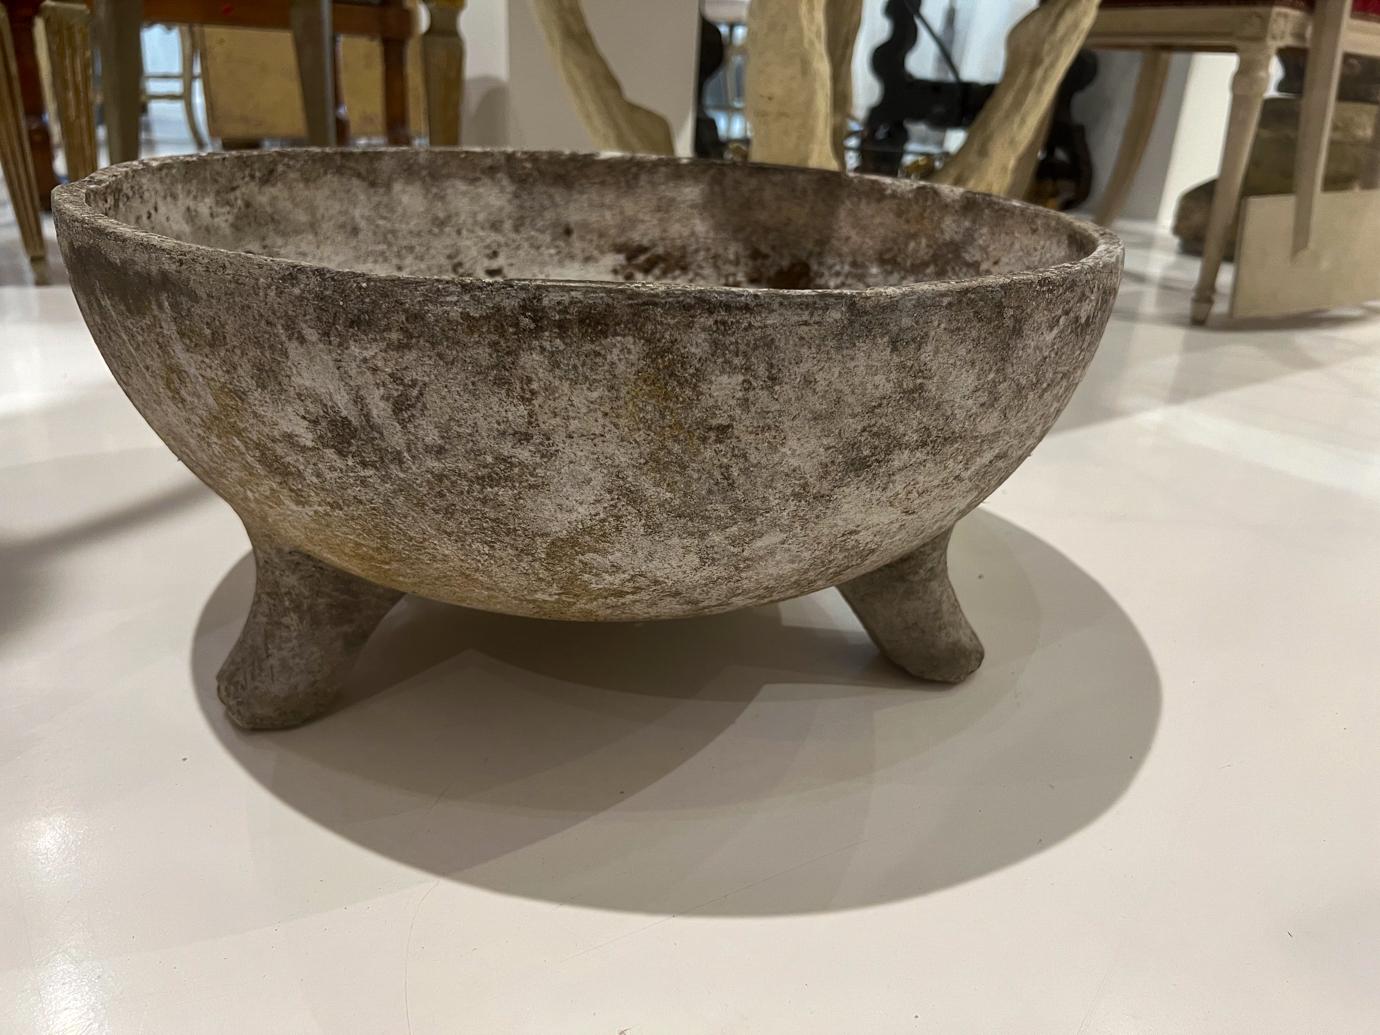 Willy Guhl was a famous Swiss designer who created planters in many shapes. These are formed from a slab of Eternit (a fibrous concrete material) moulded into a bowl with feet.
   